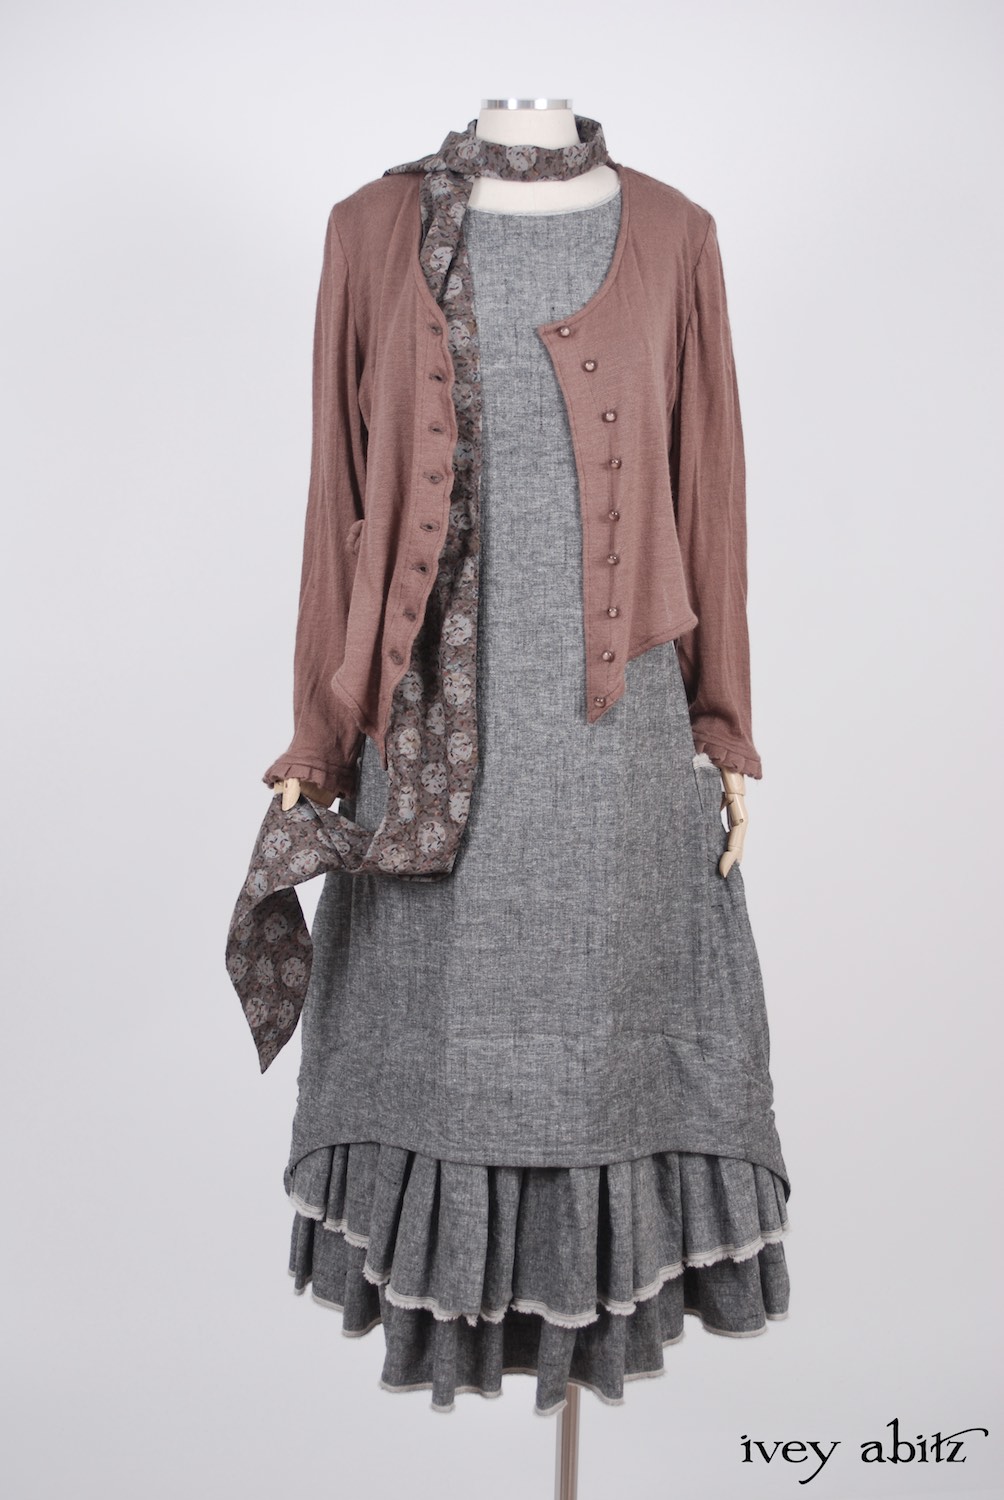 Ivey Abitz - Canterbury Cardigan in Blushed Cashmere Knit  - Blanchefleur Sash in Flock and Moon Cotton Voile  - Limited Edition Trelawny Frock in Blackbird/Dove Rustic Weave, High Water Length